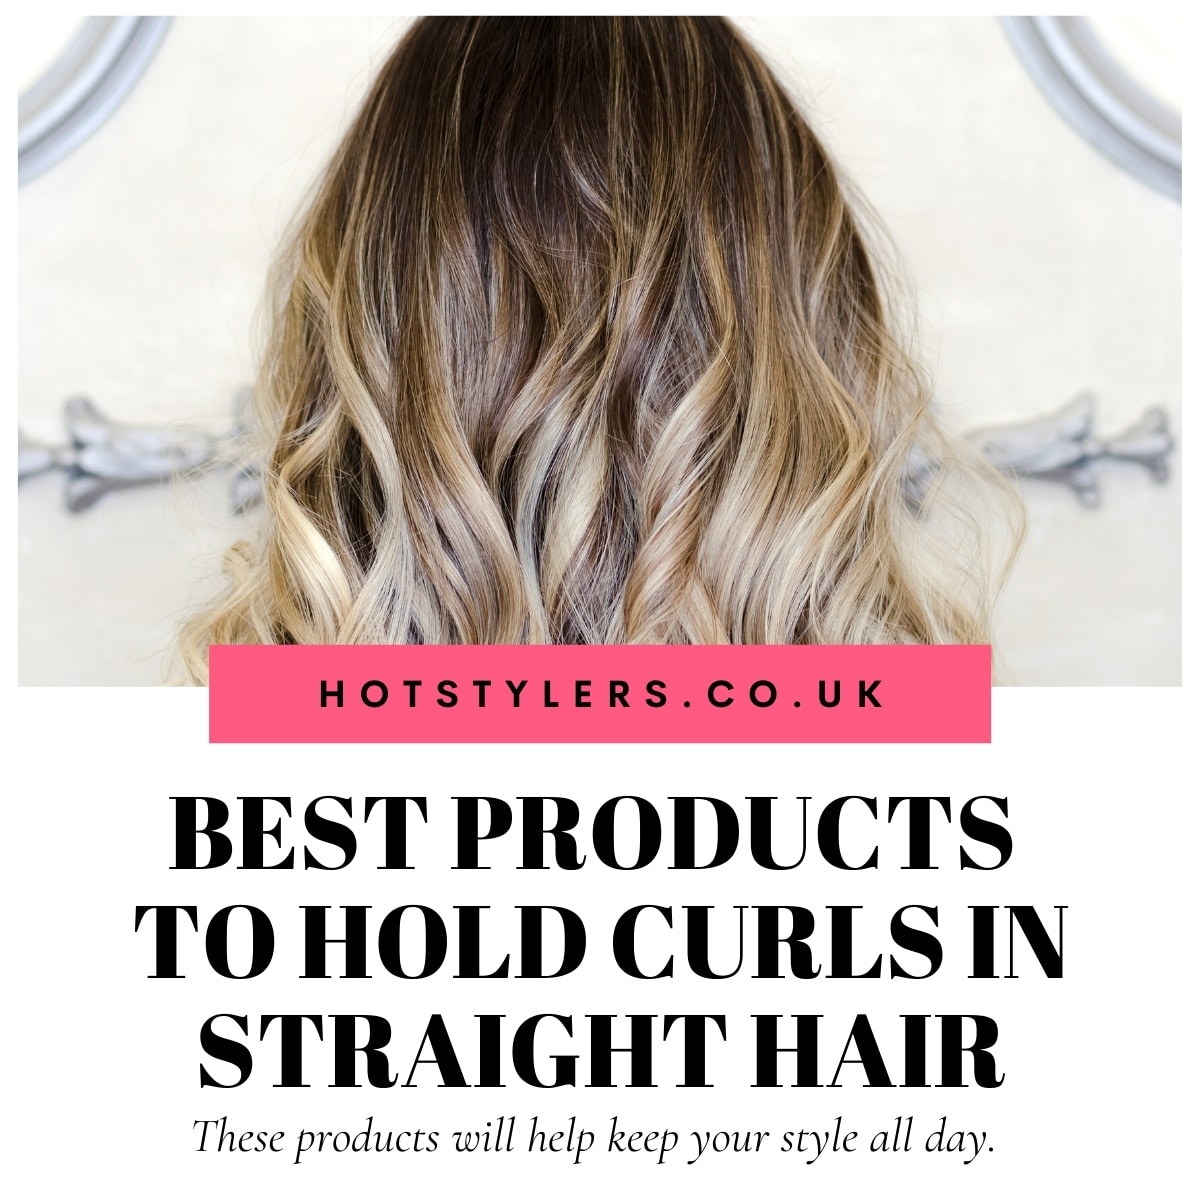 Best Products To Hold Curls in Straight Hair